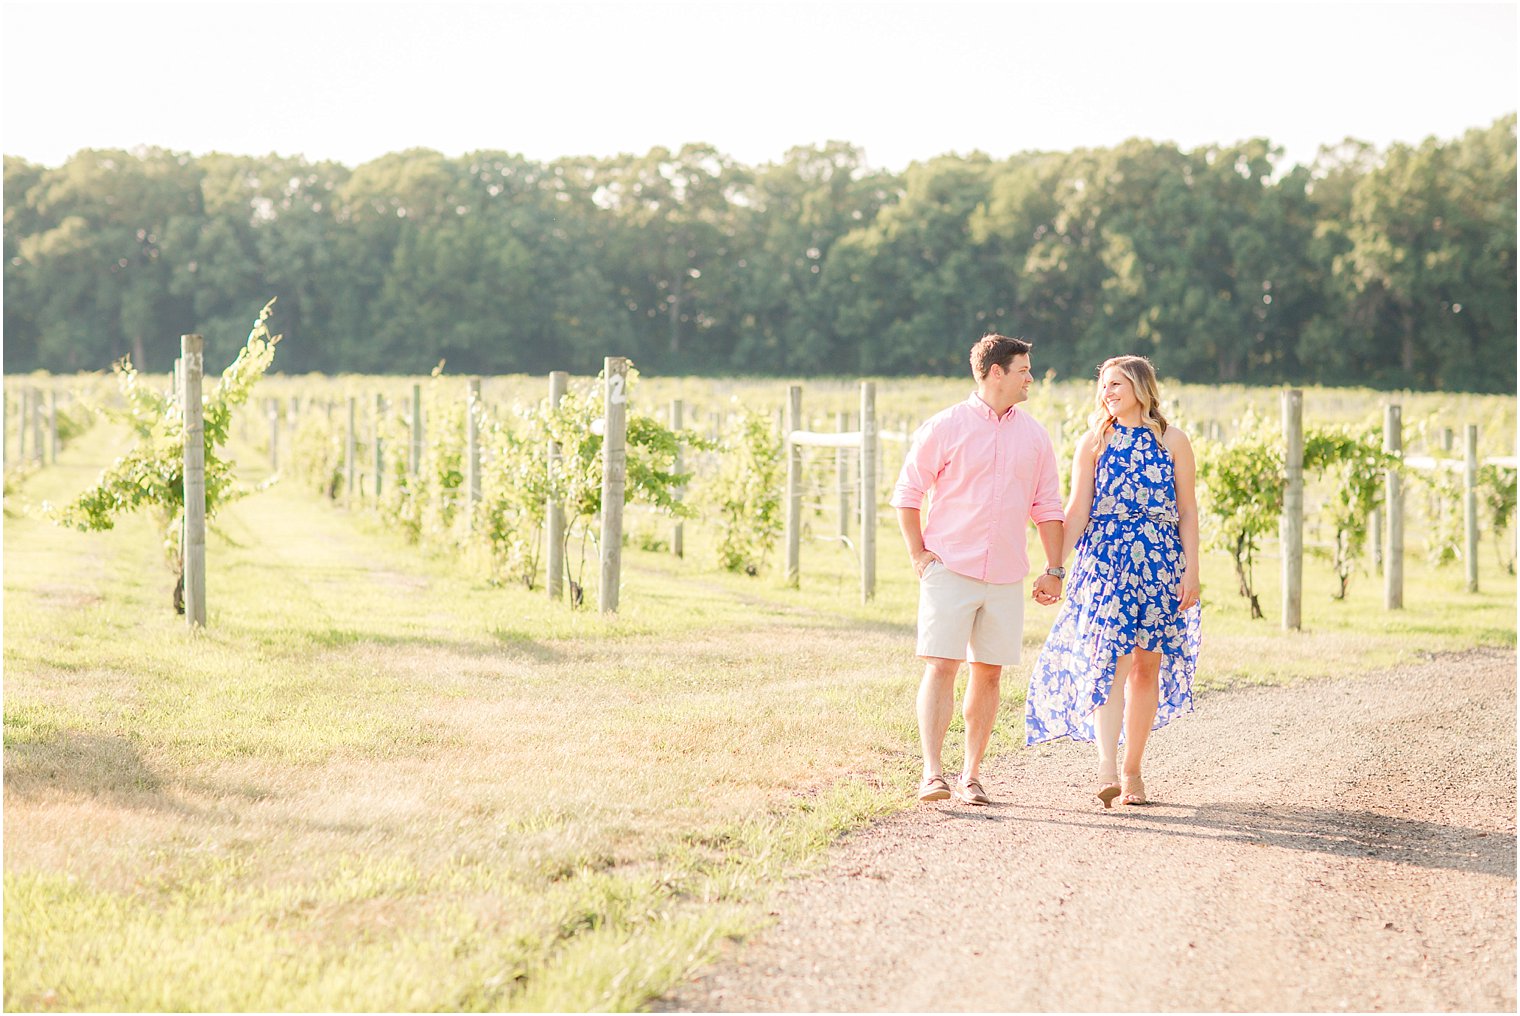 Couple walking in driveway at Laurita Winery in New Egypt NJ during engagement session